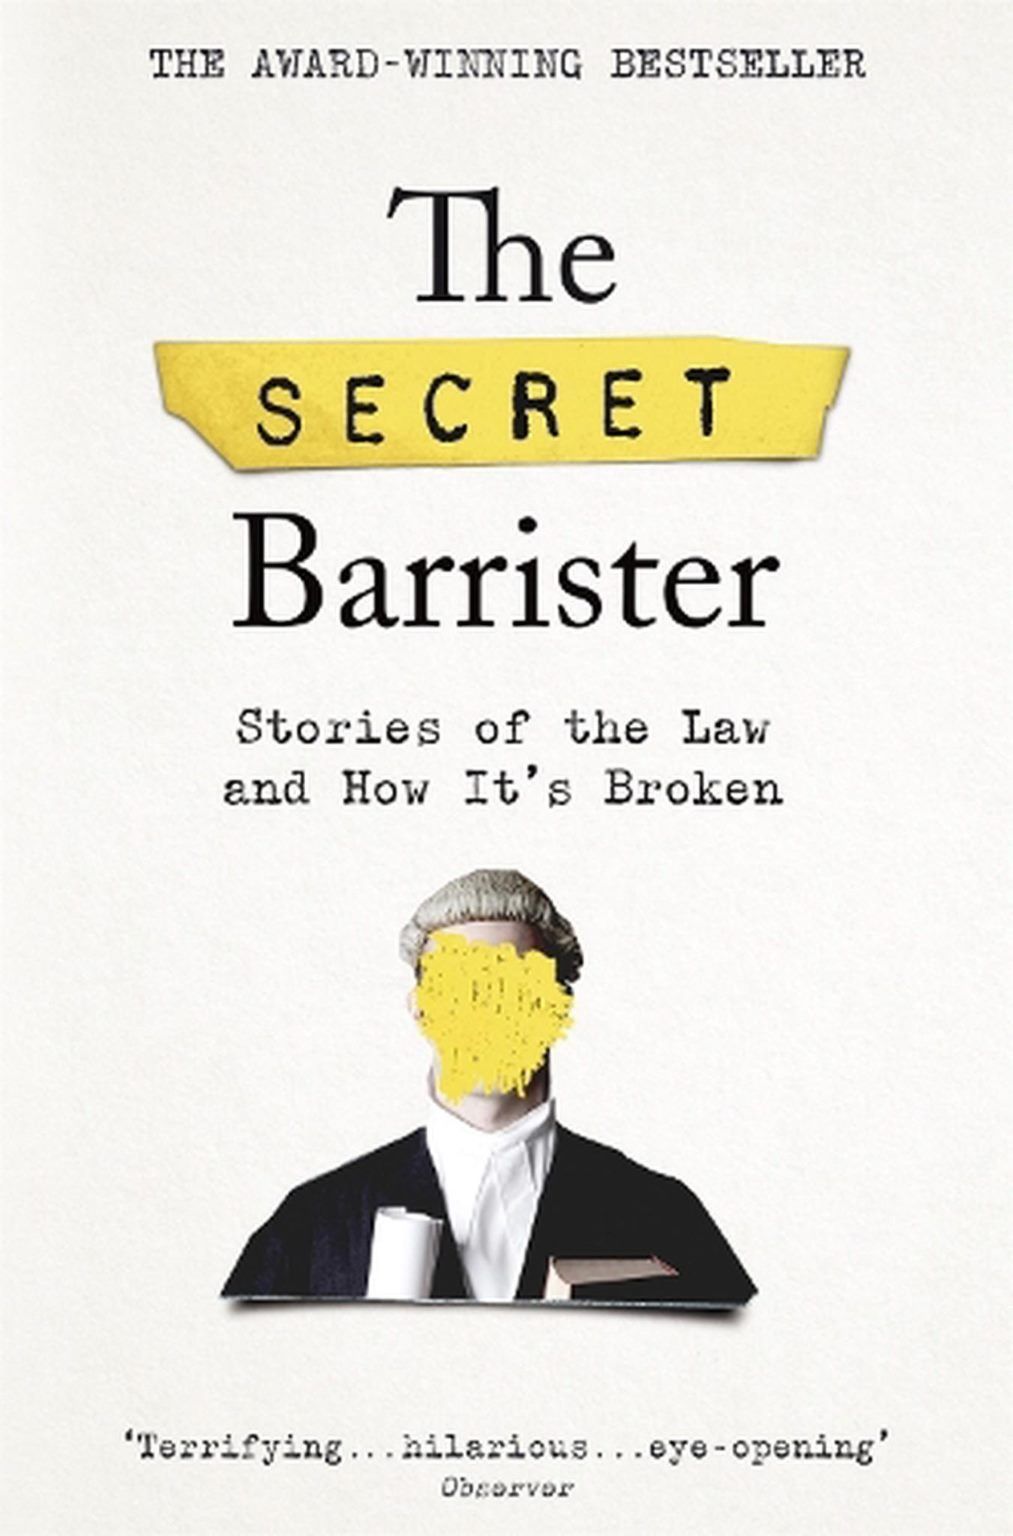 THE SECRET BARRISTER: Stories of the law an How it is Broken